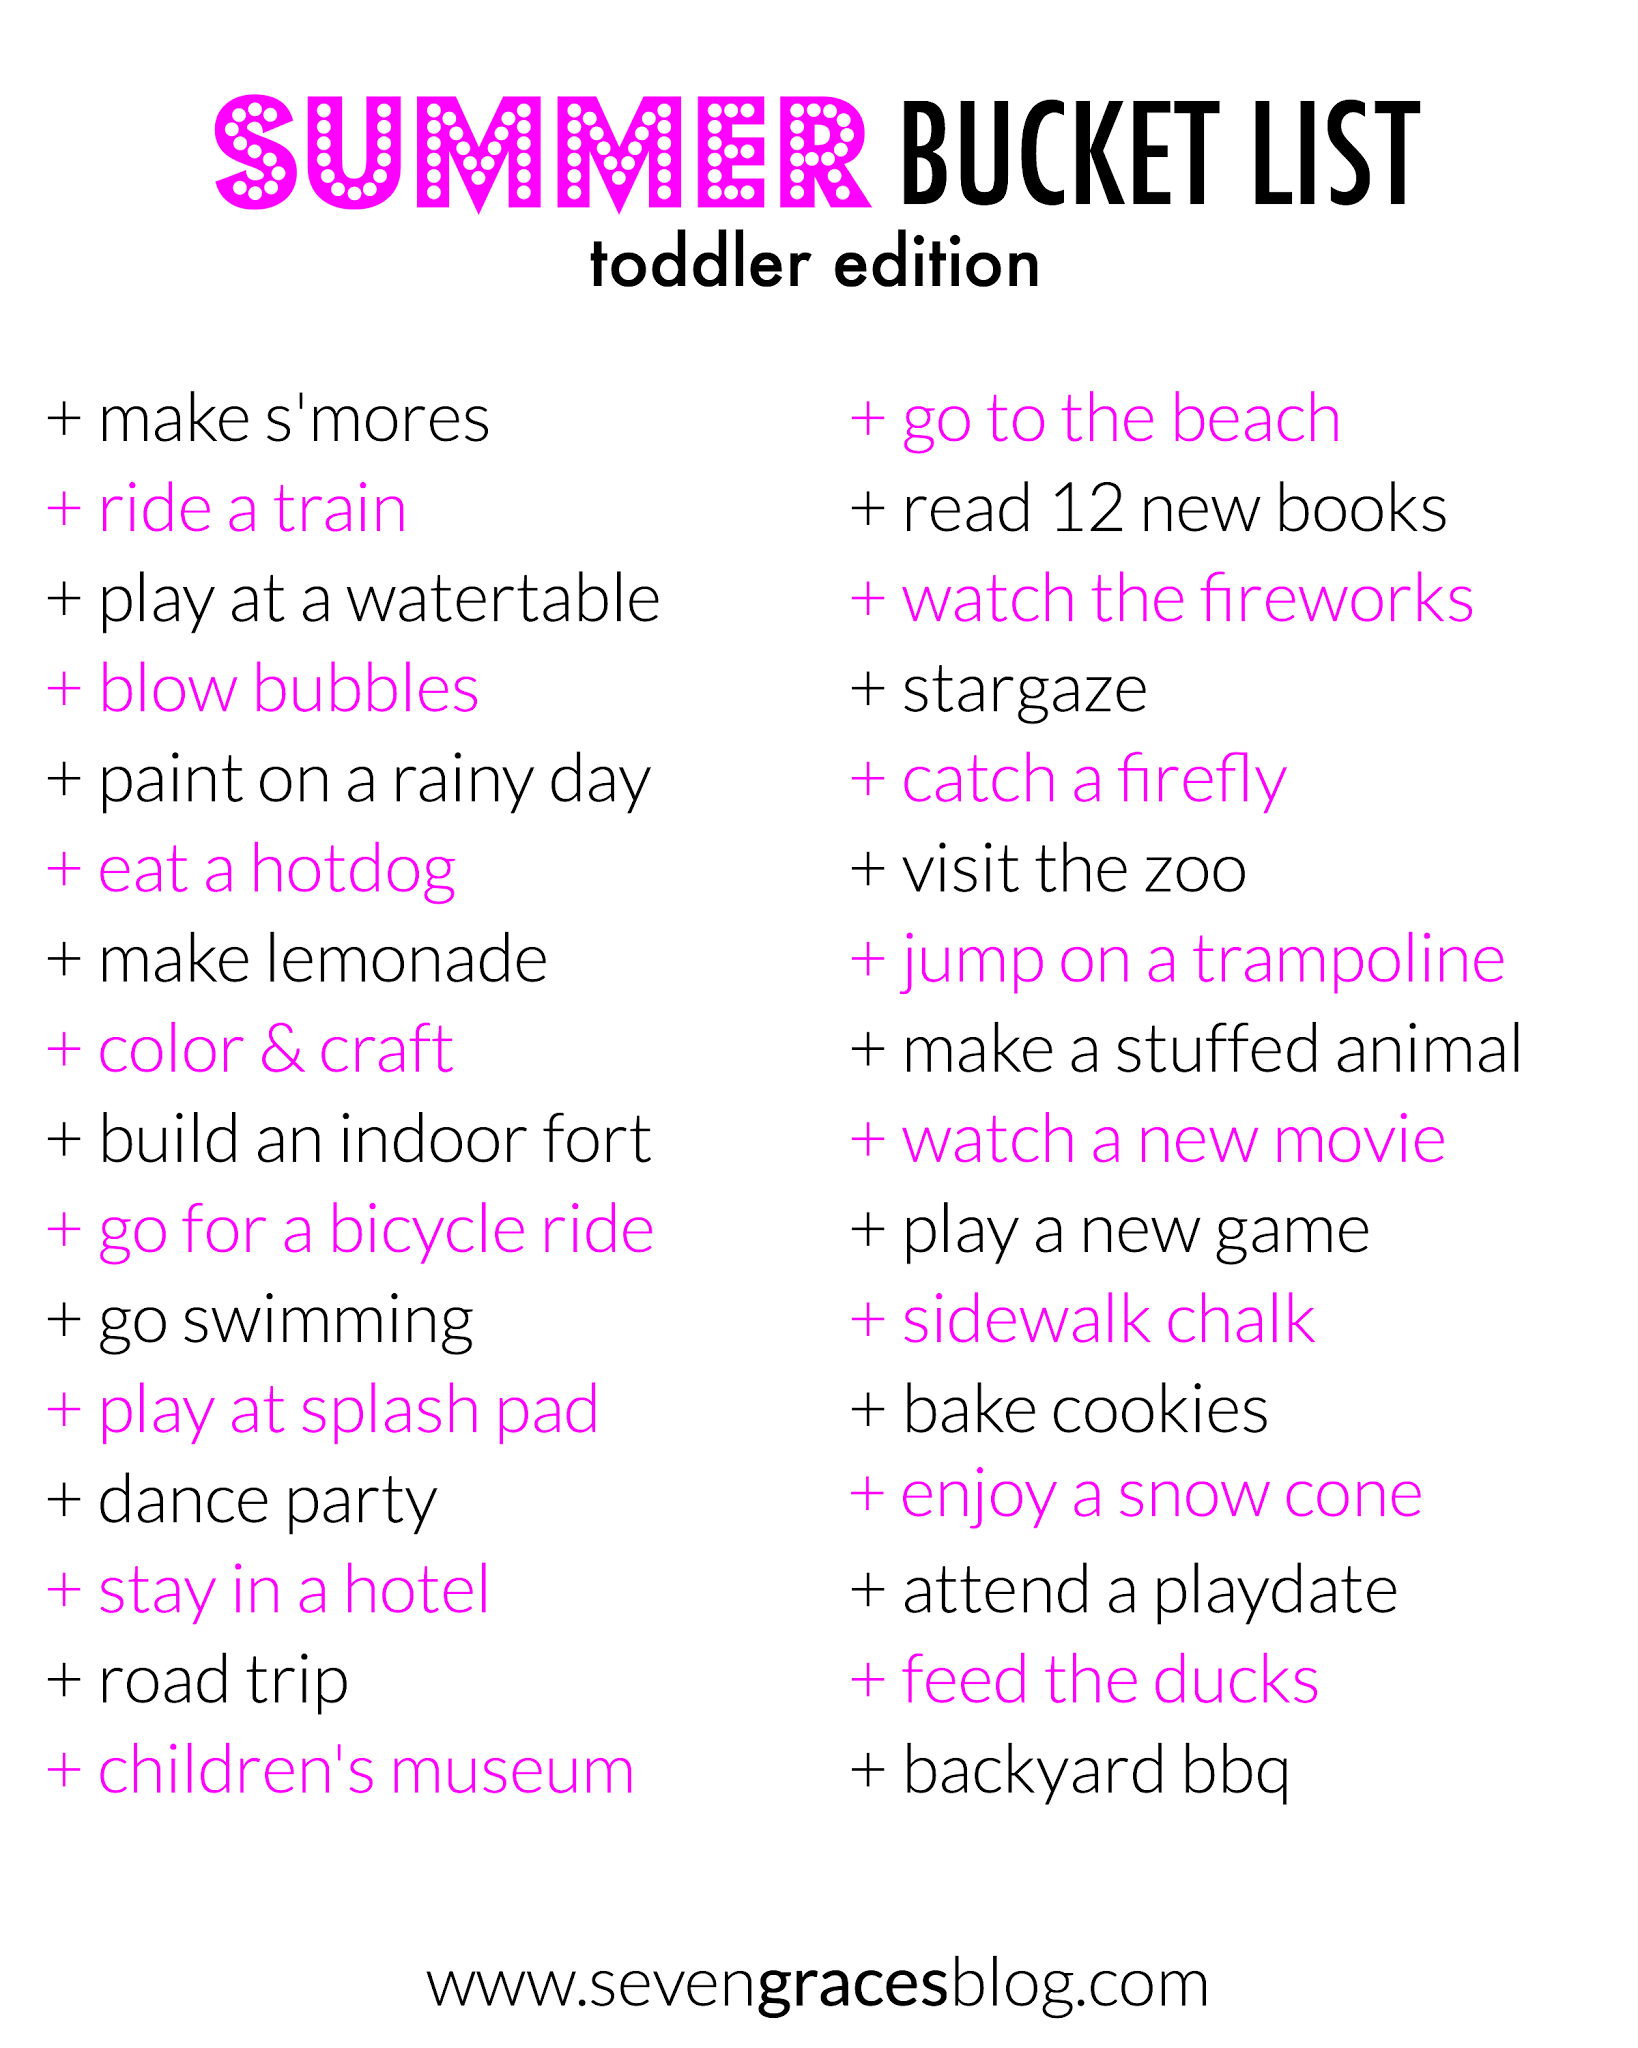 50 Summertime Activities & Boredom Busters! The ultimate Summer Bucket List for toddlers and preschoolers!